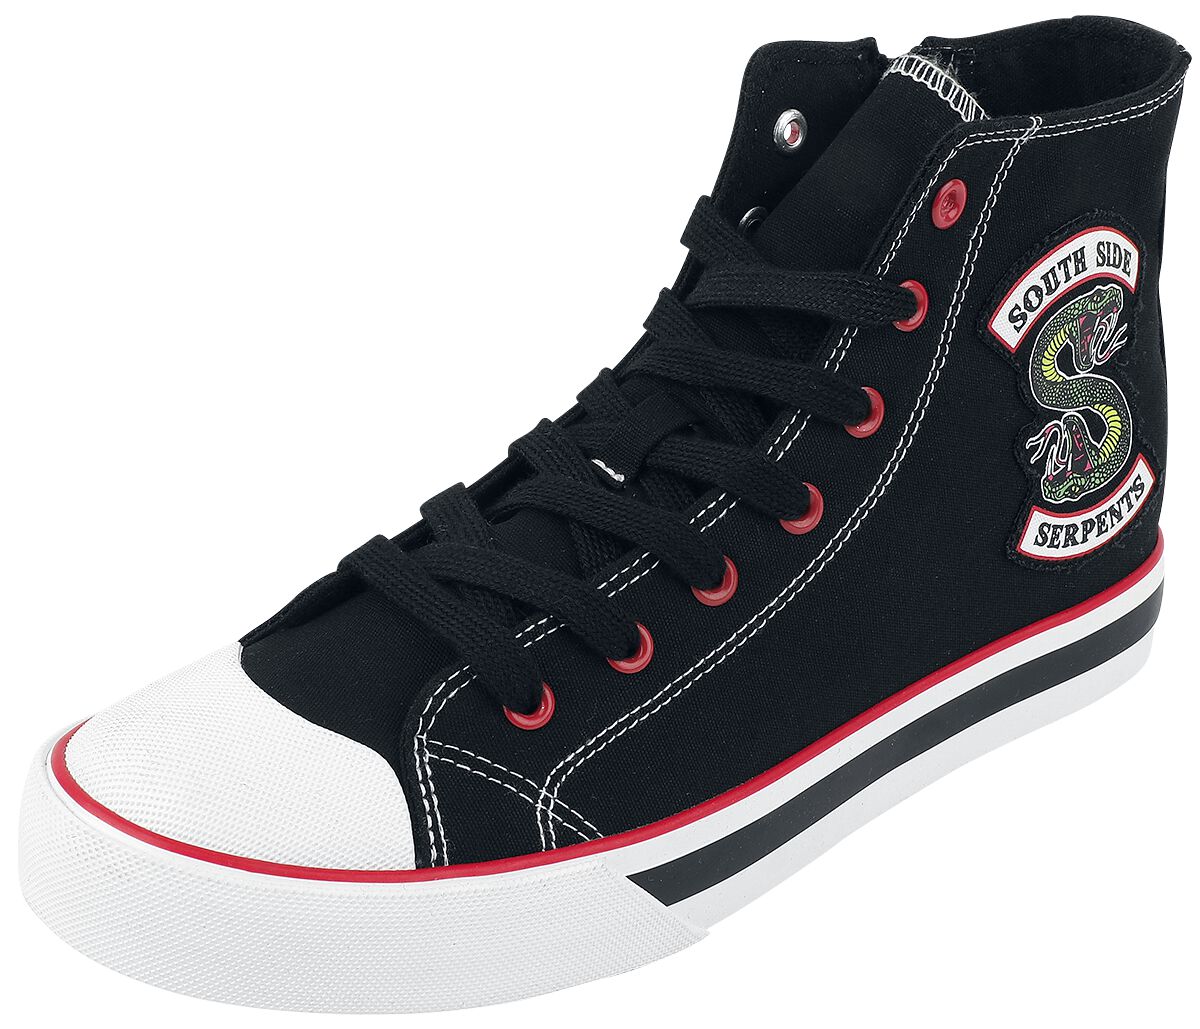 Riverdale South Side Serpents Sneakers High black